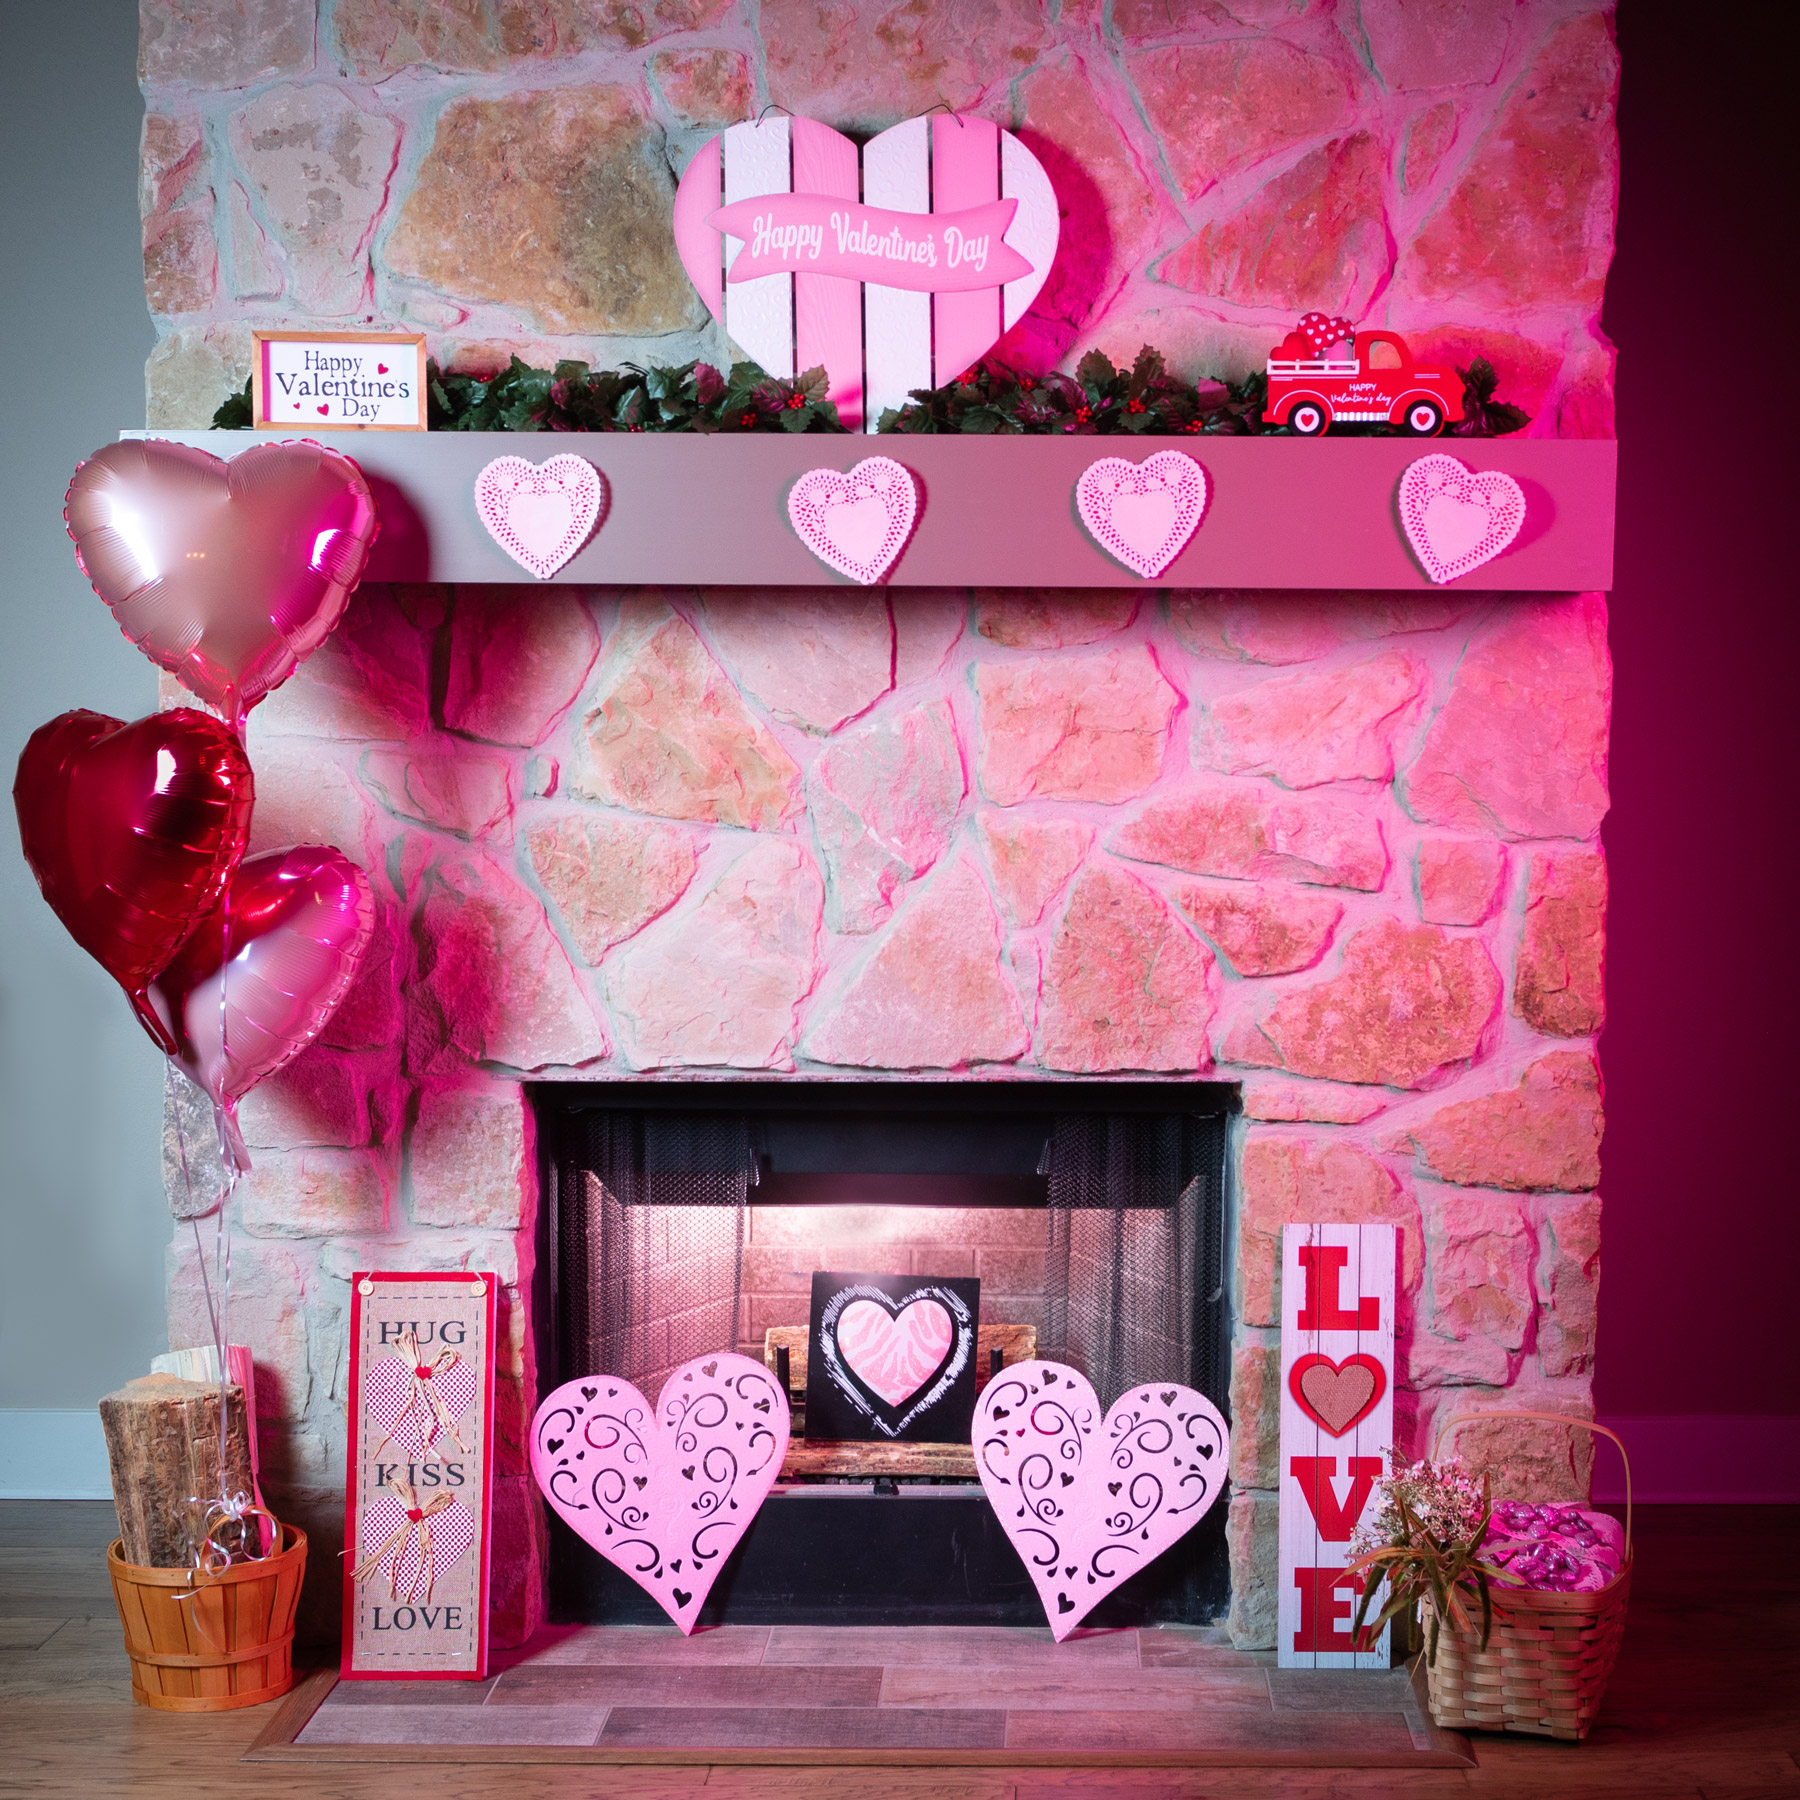 Valentine's Photo setup by the fireplace. It has Pink hearts on the mantle, Pink and red ballons.